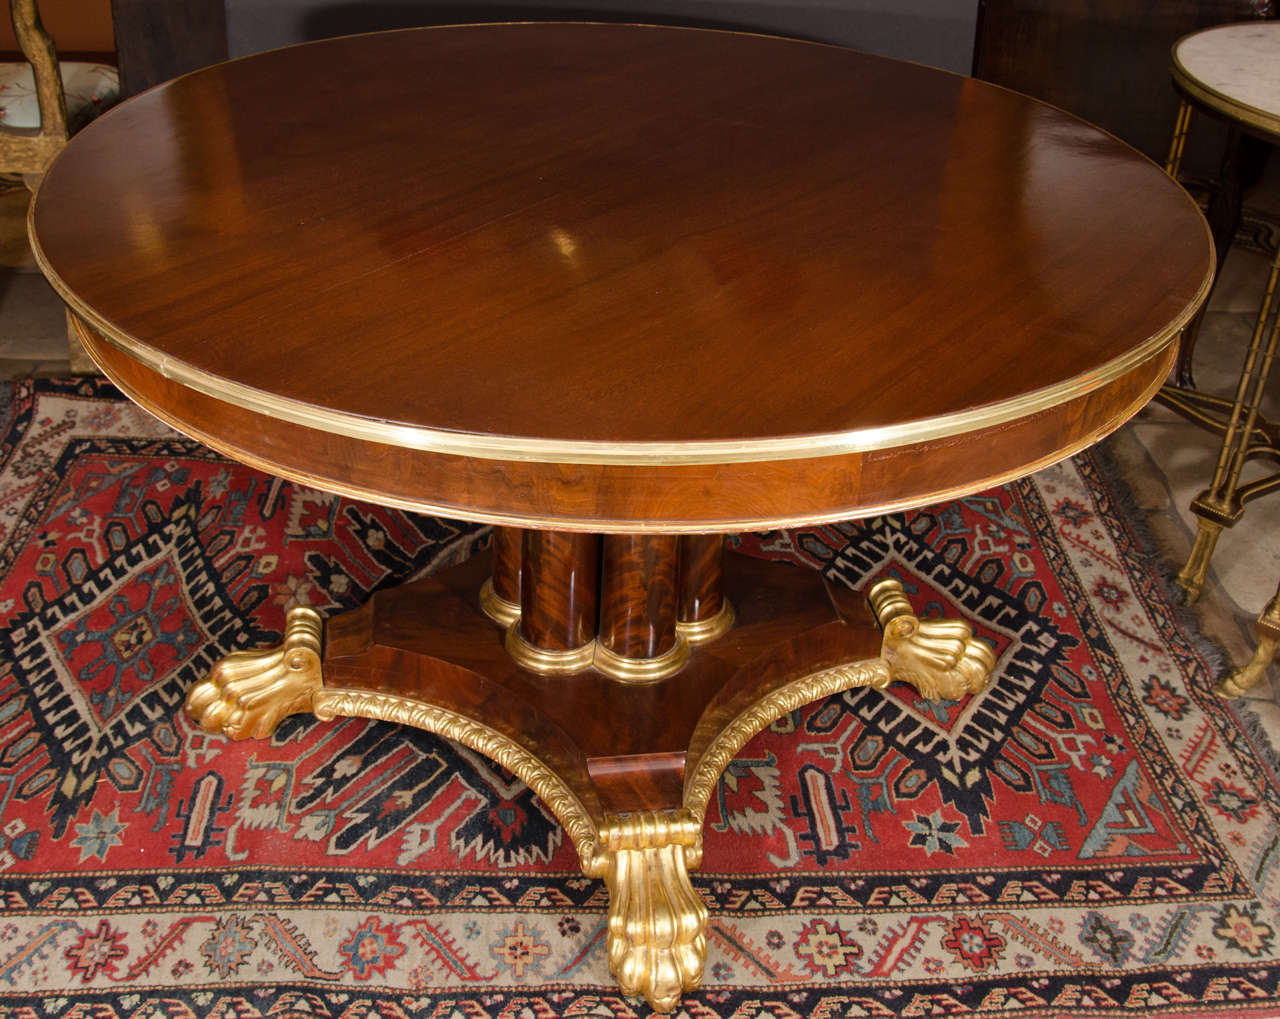 A Regency mahogany center table with brass banded rim and gilt moldings raised on a cluster column pedestal ending in gilt paw feet.